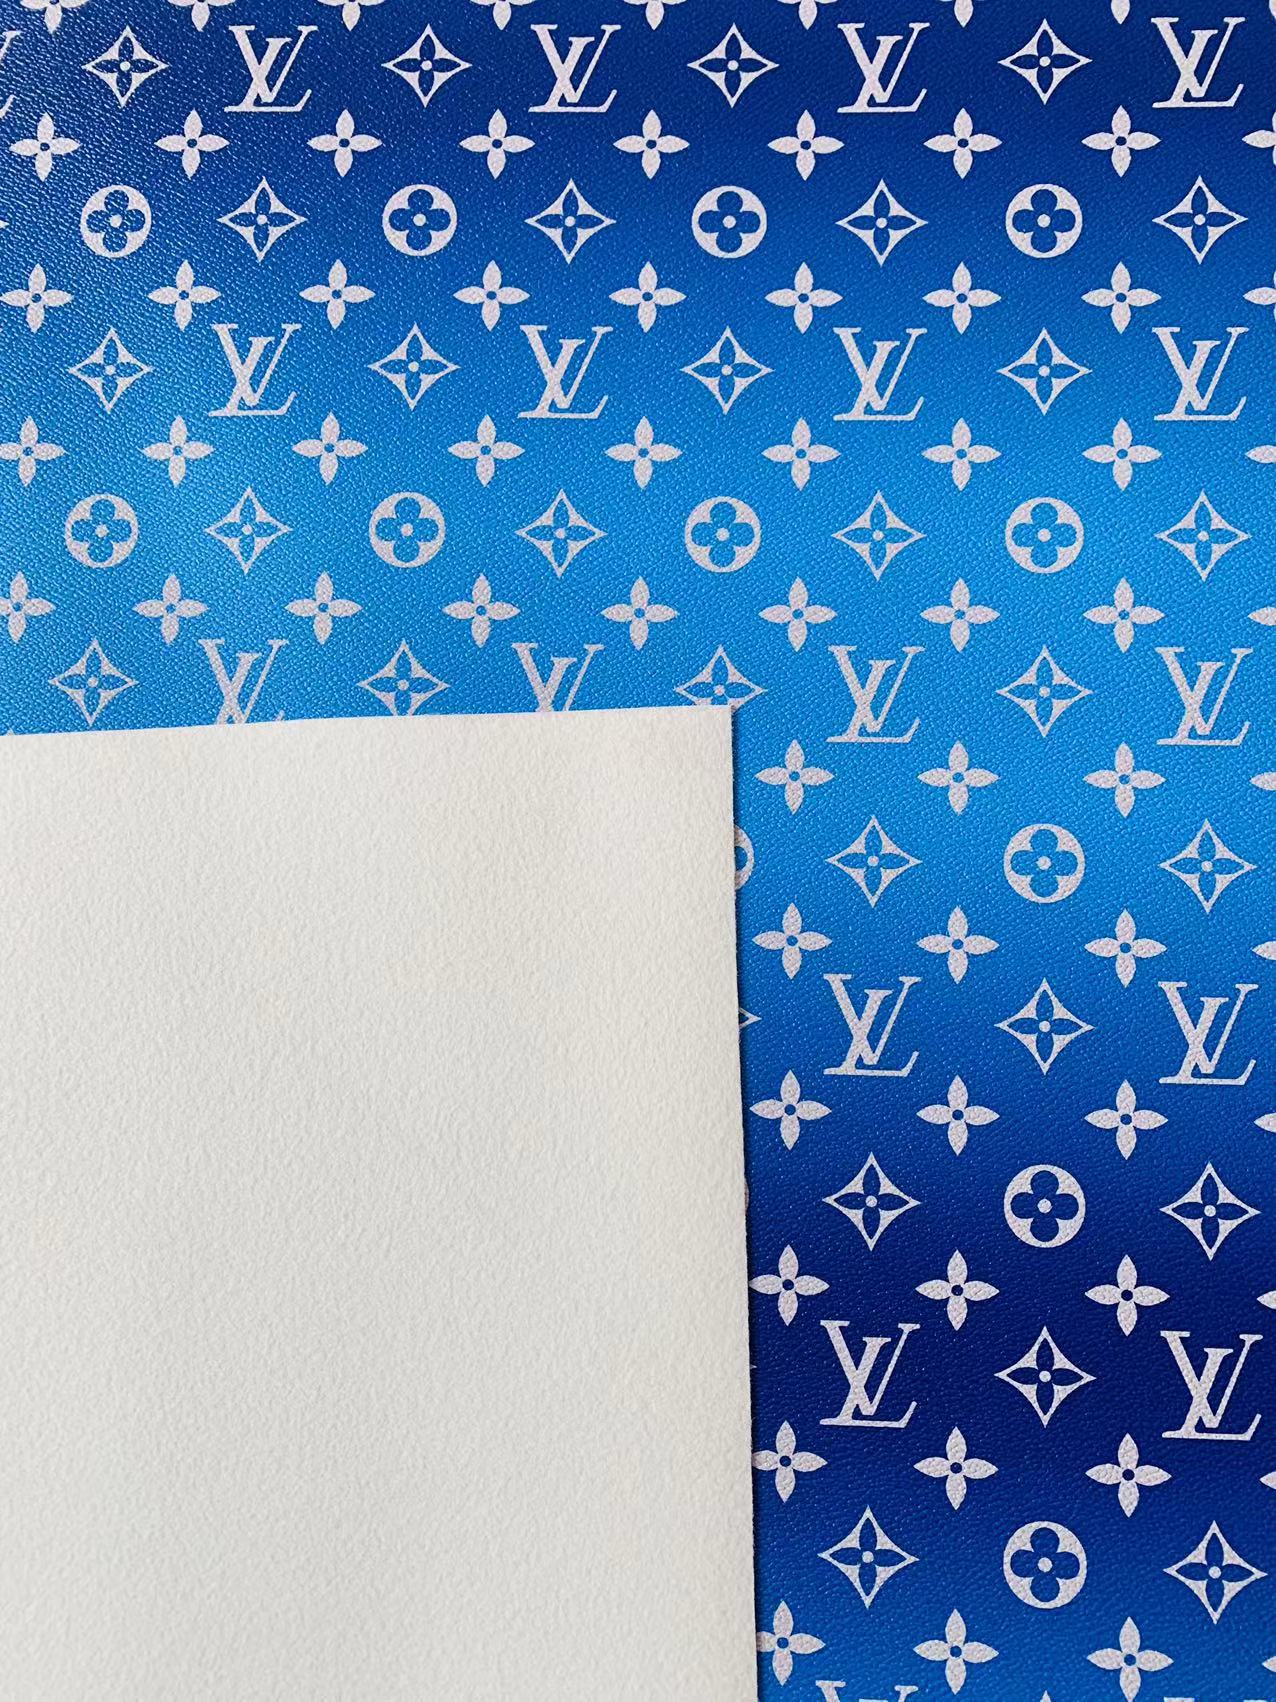 New LV Dark Blue with Light Blue Stripe Design Leather Fabric For